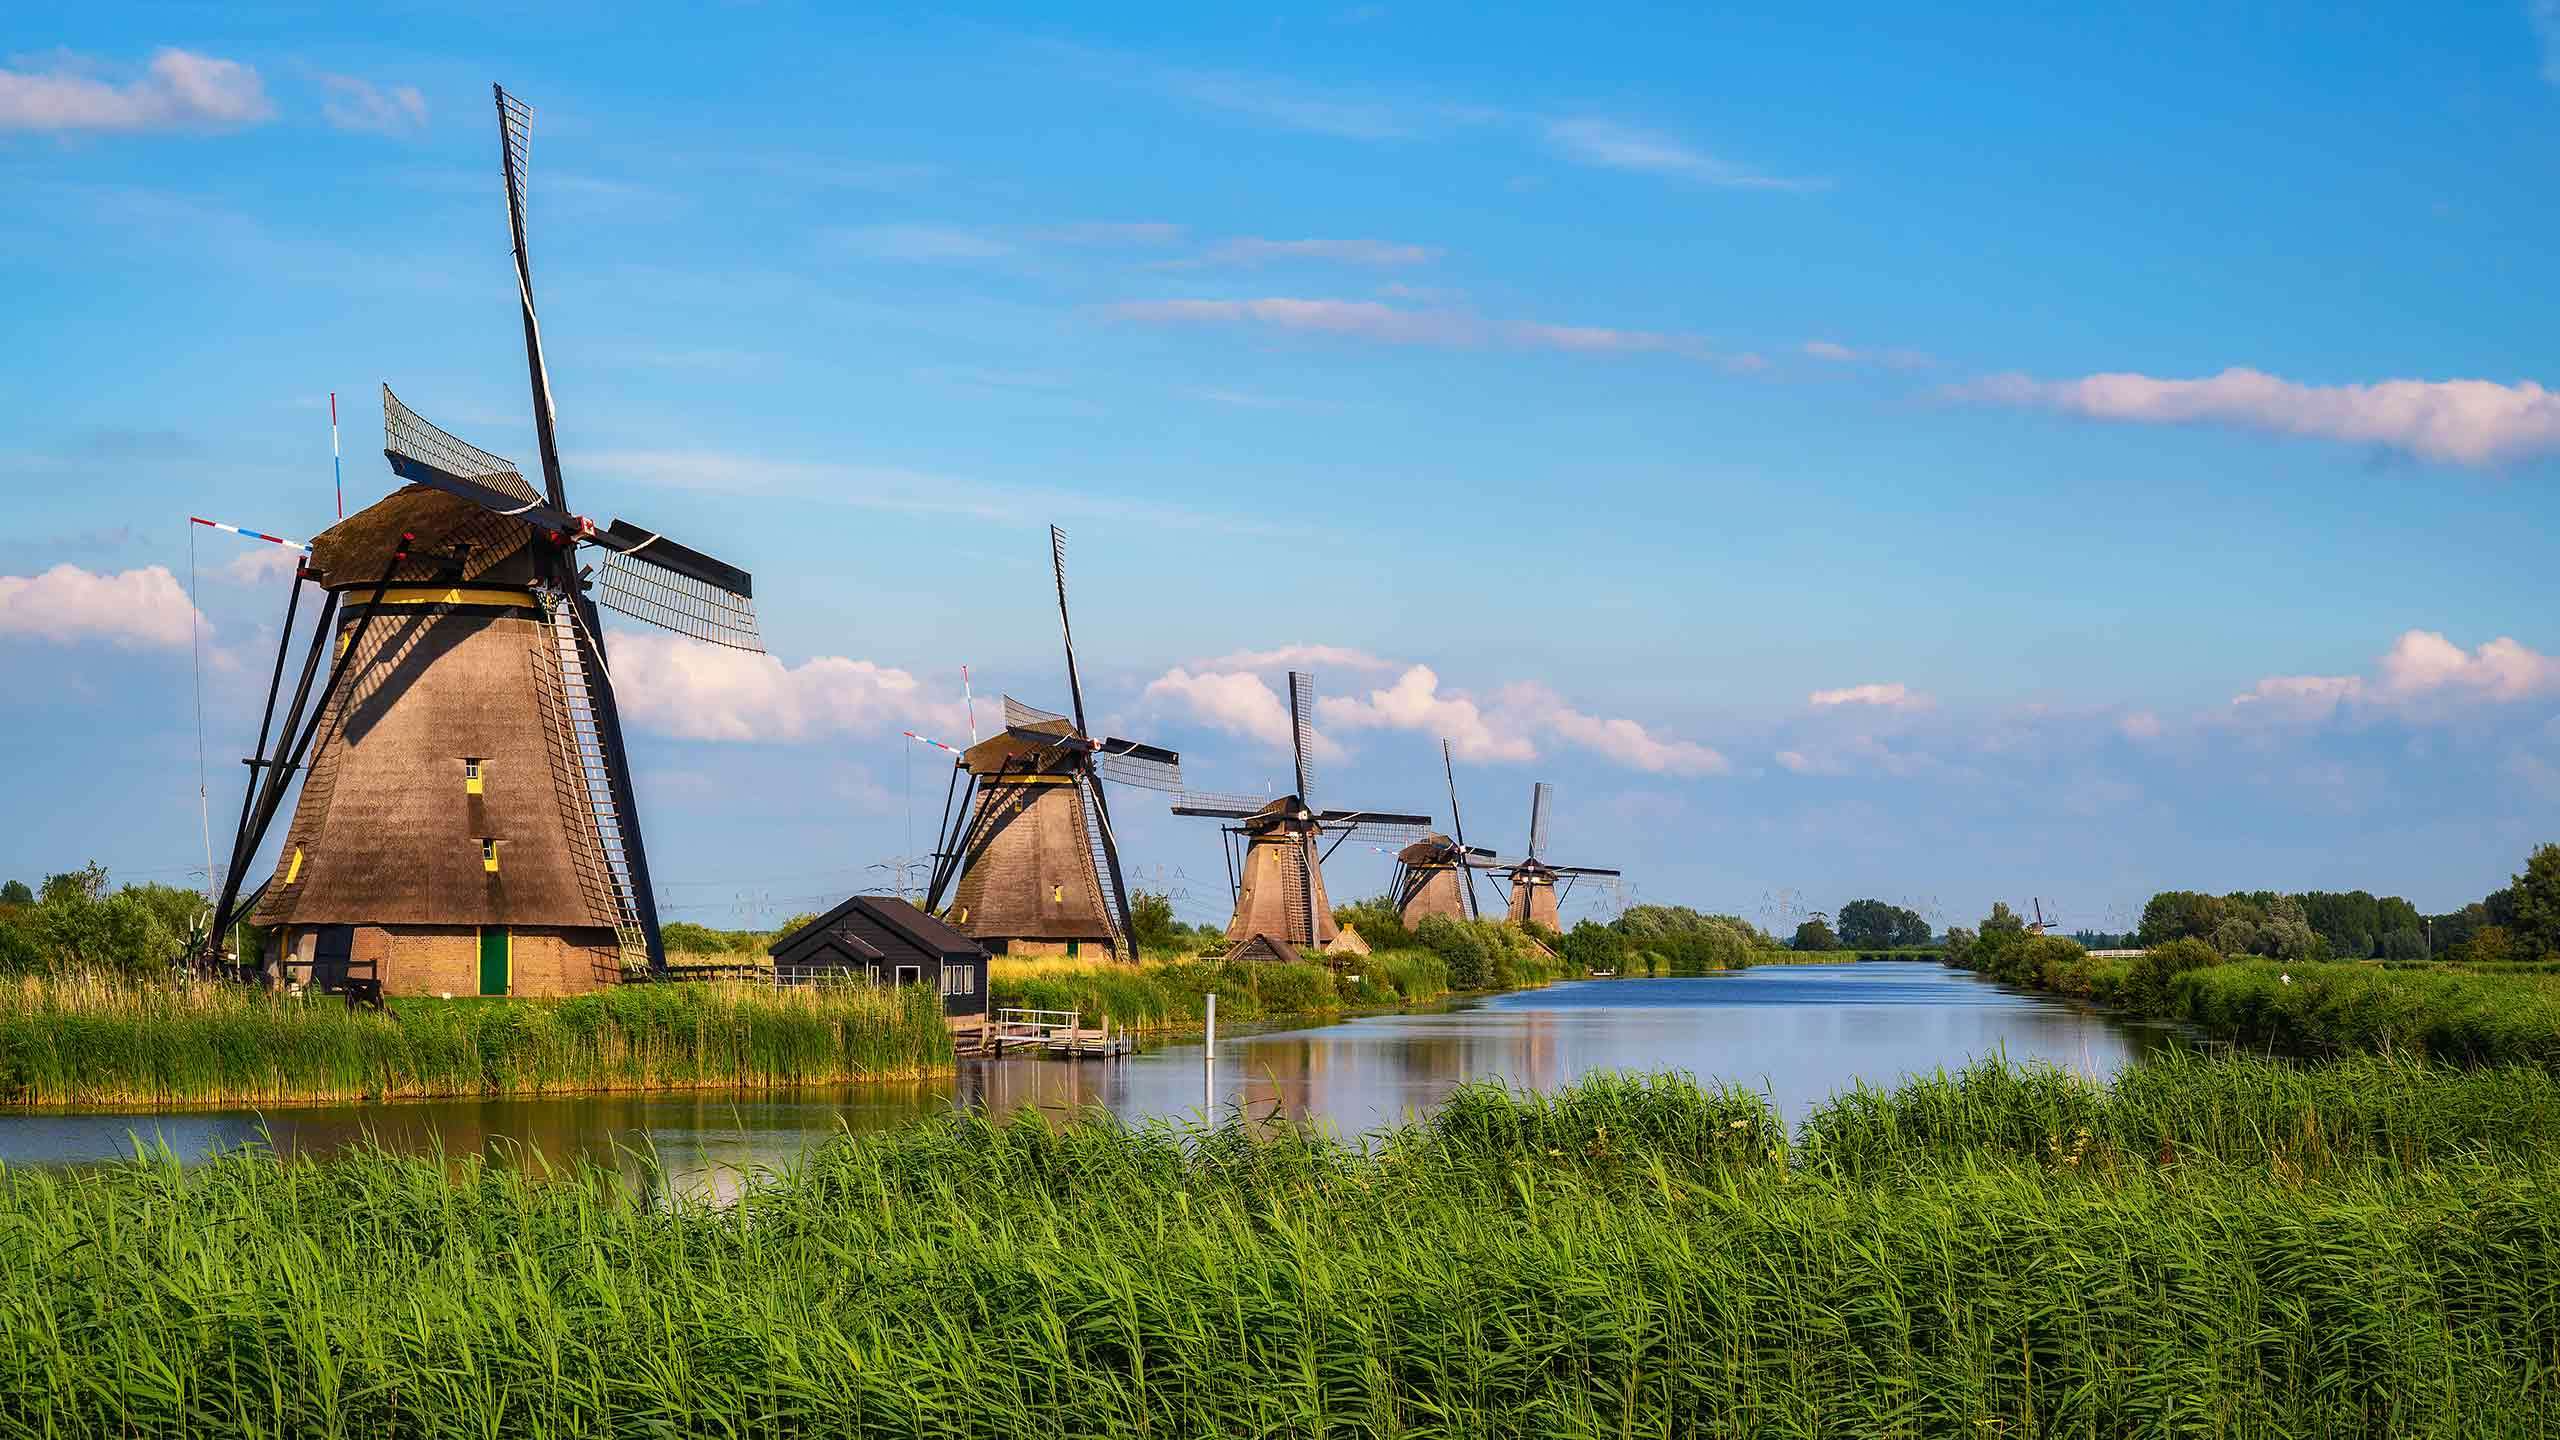 Luxury Dutch & Belgian Waterways River Cruise & Bike (Tulip Time From Amsterdam To Bruges) 8D7N, Fully Guided            